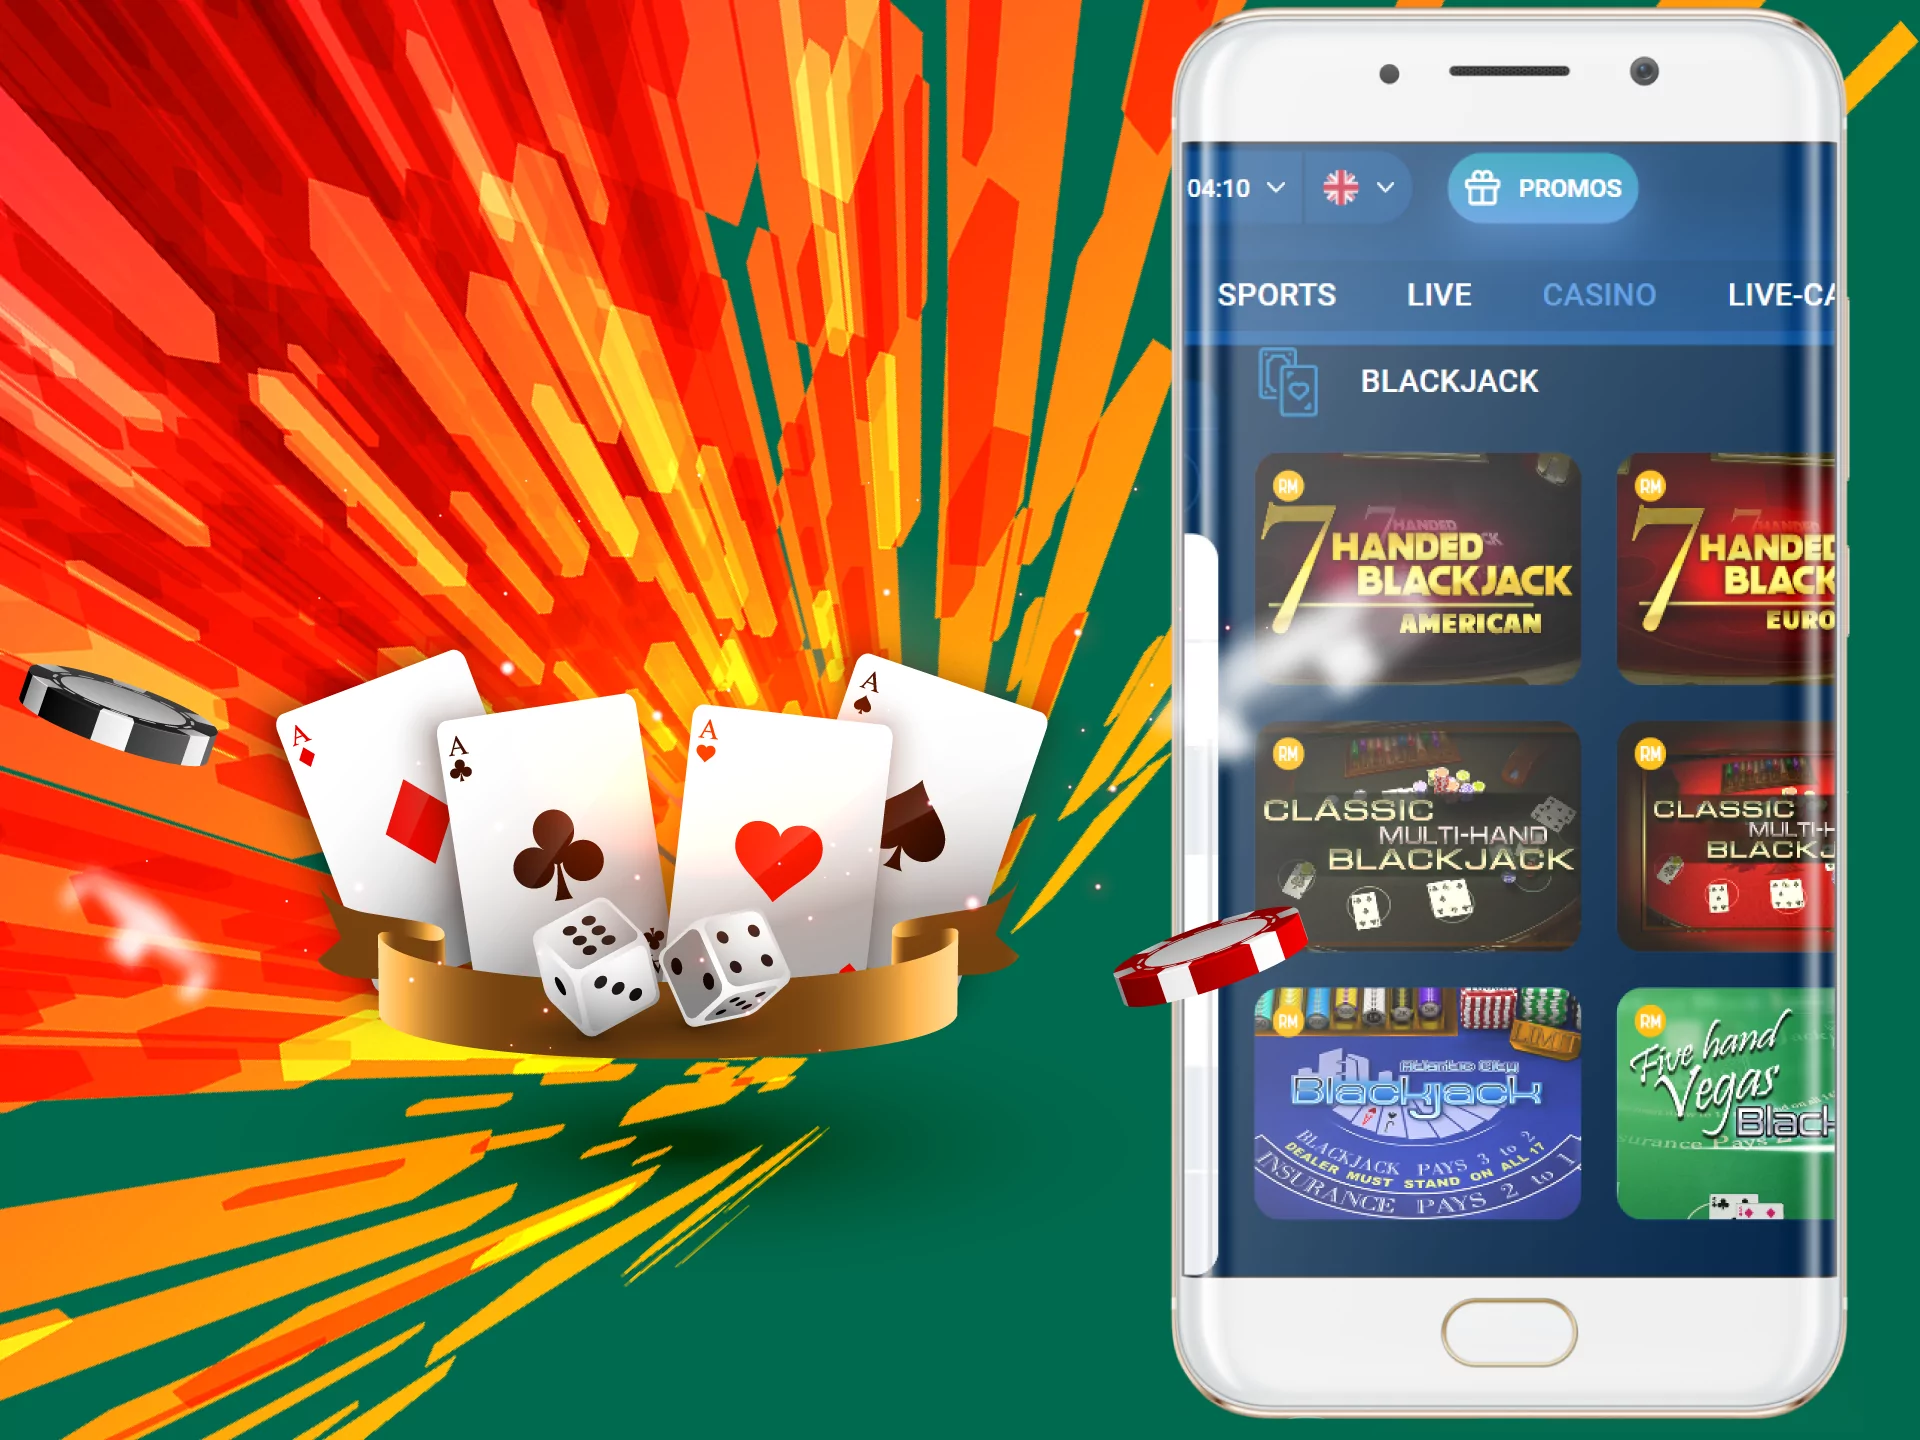 Get 21 points and win a blackjack game at Parimatch.